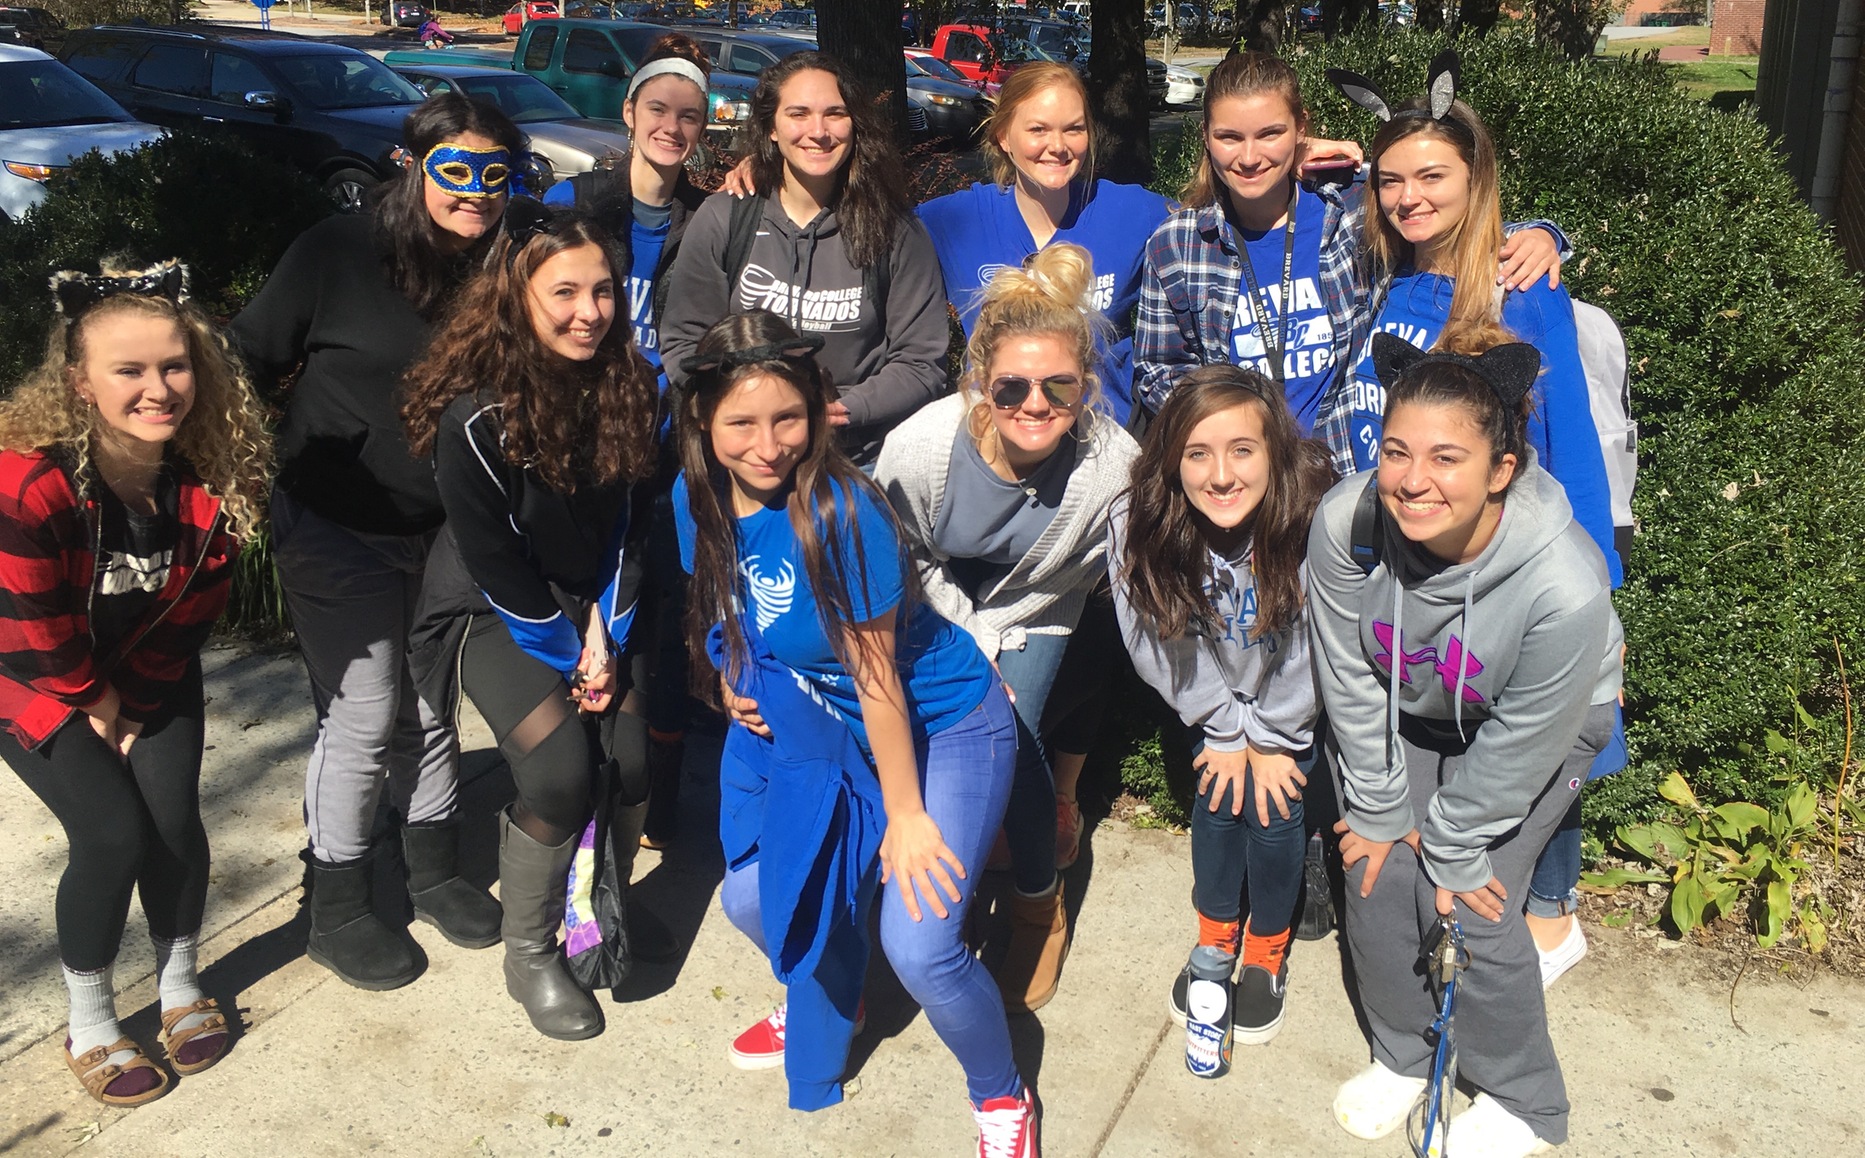 Brevard College Student-Athletes "Trick Or Treat" For Those in Need